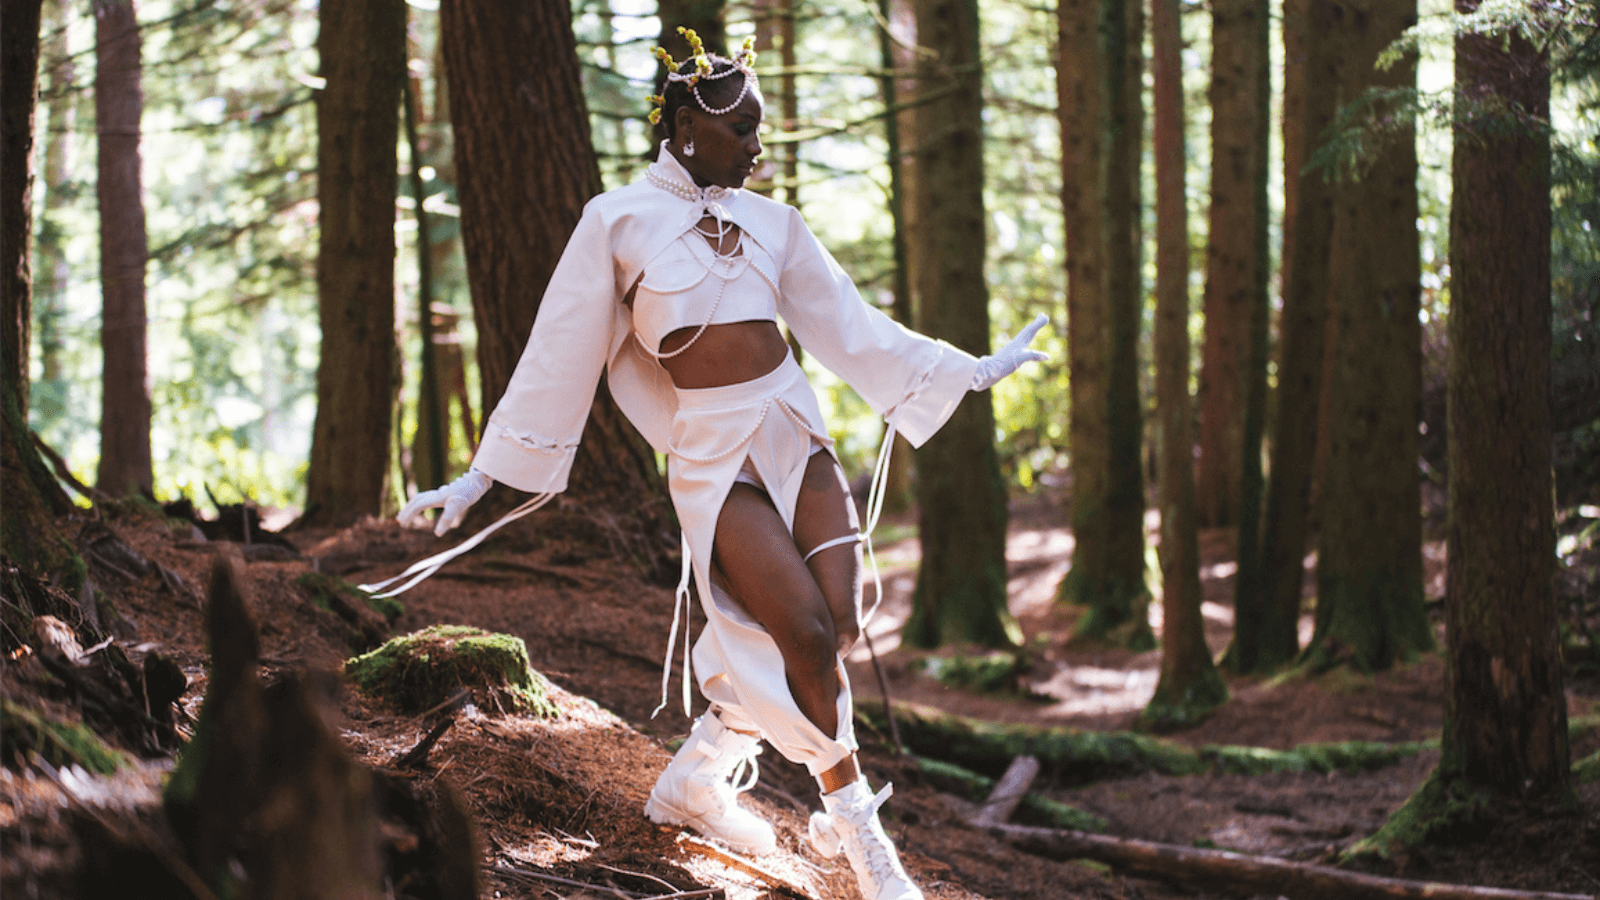 A still from OMOS. Credit: Washington Gwande. Dancer Divine Tasinda stands in a wooded area, wearing a light pink outfit with pearls on it.